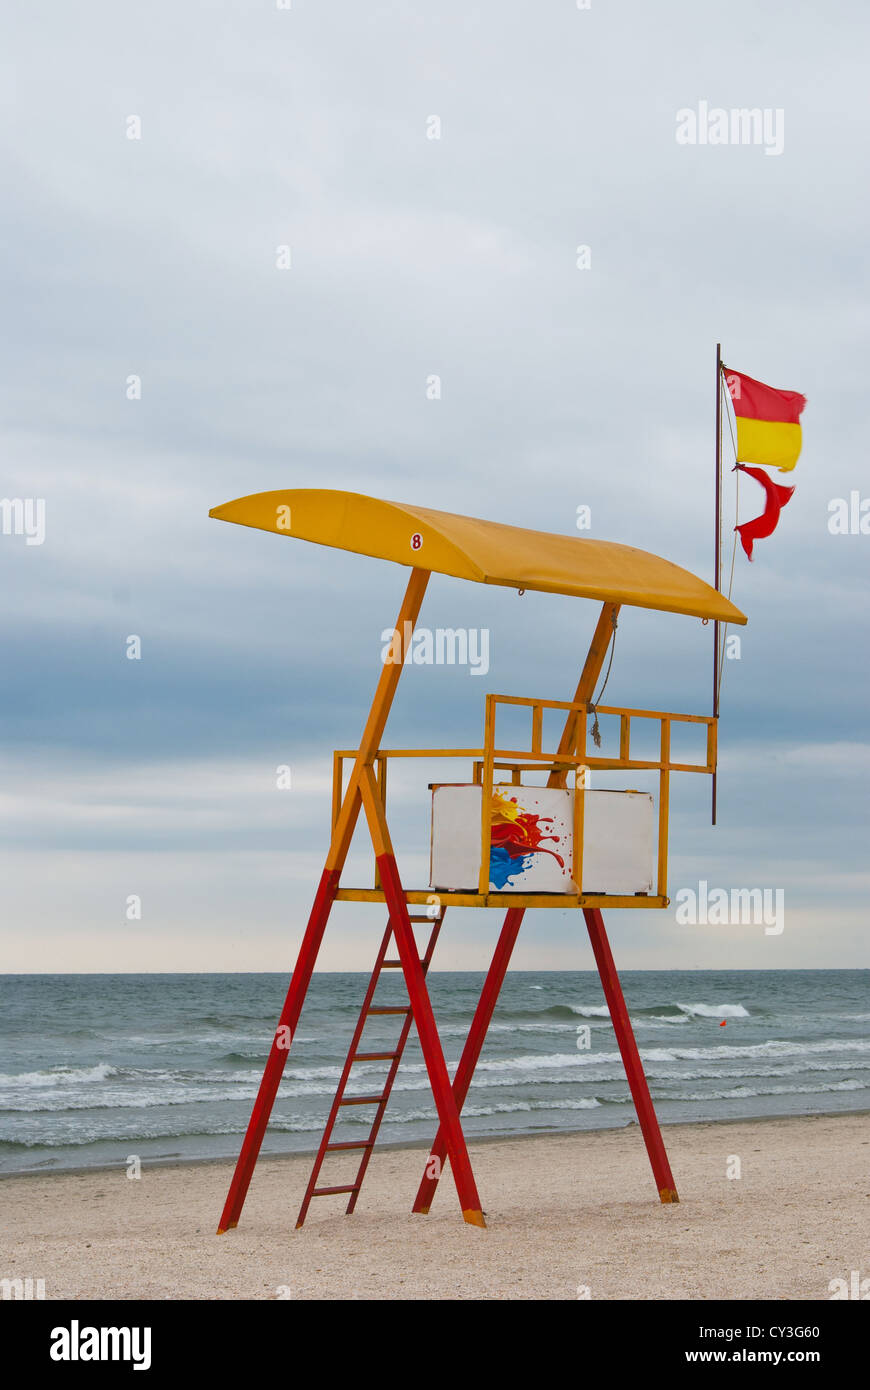 Lifeguard tower on a lonely beach Stock Photo